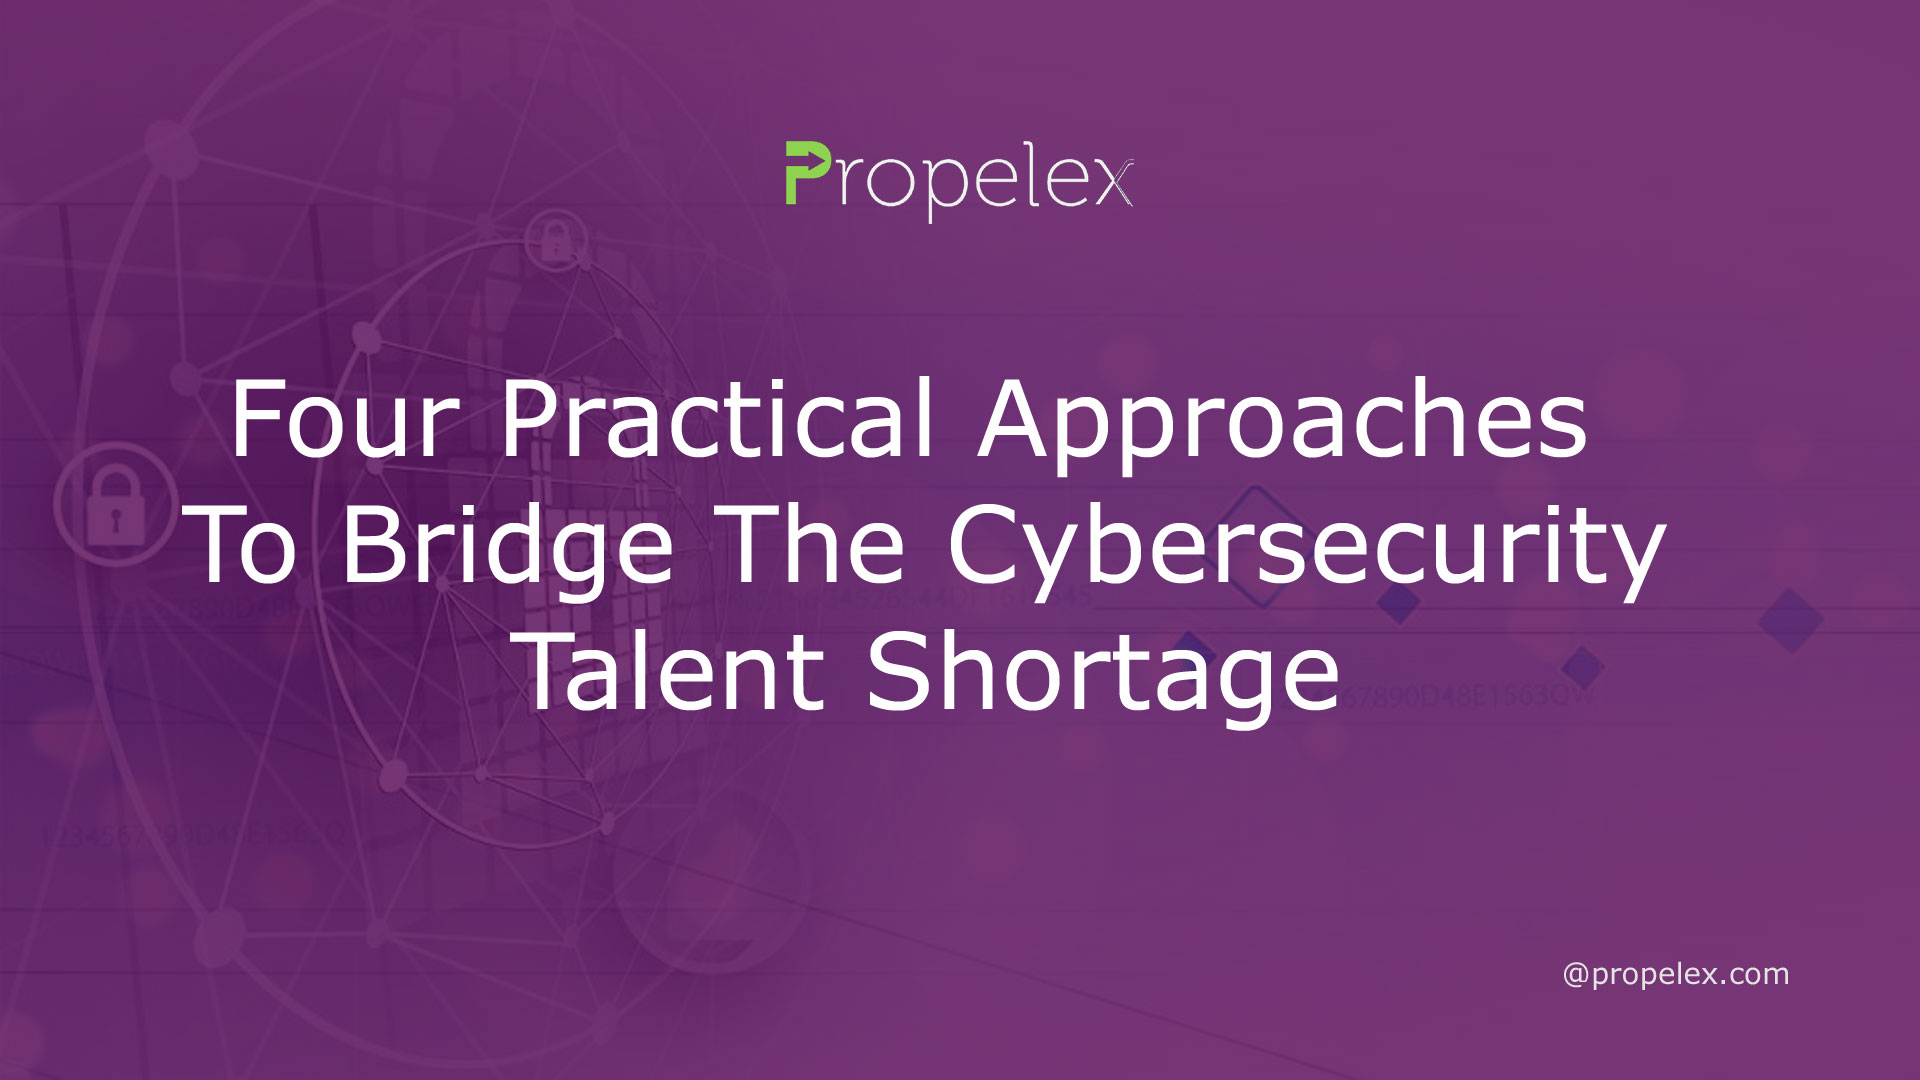 Four Practical Approaches To Bridge The Cybersecurity Talent Shortage